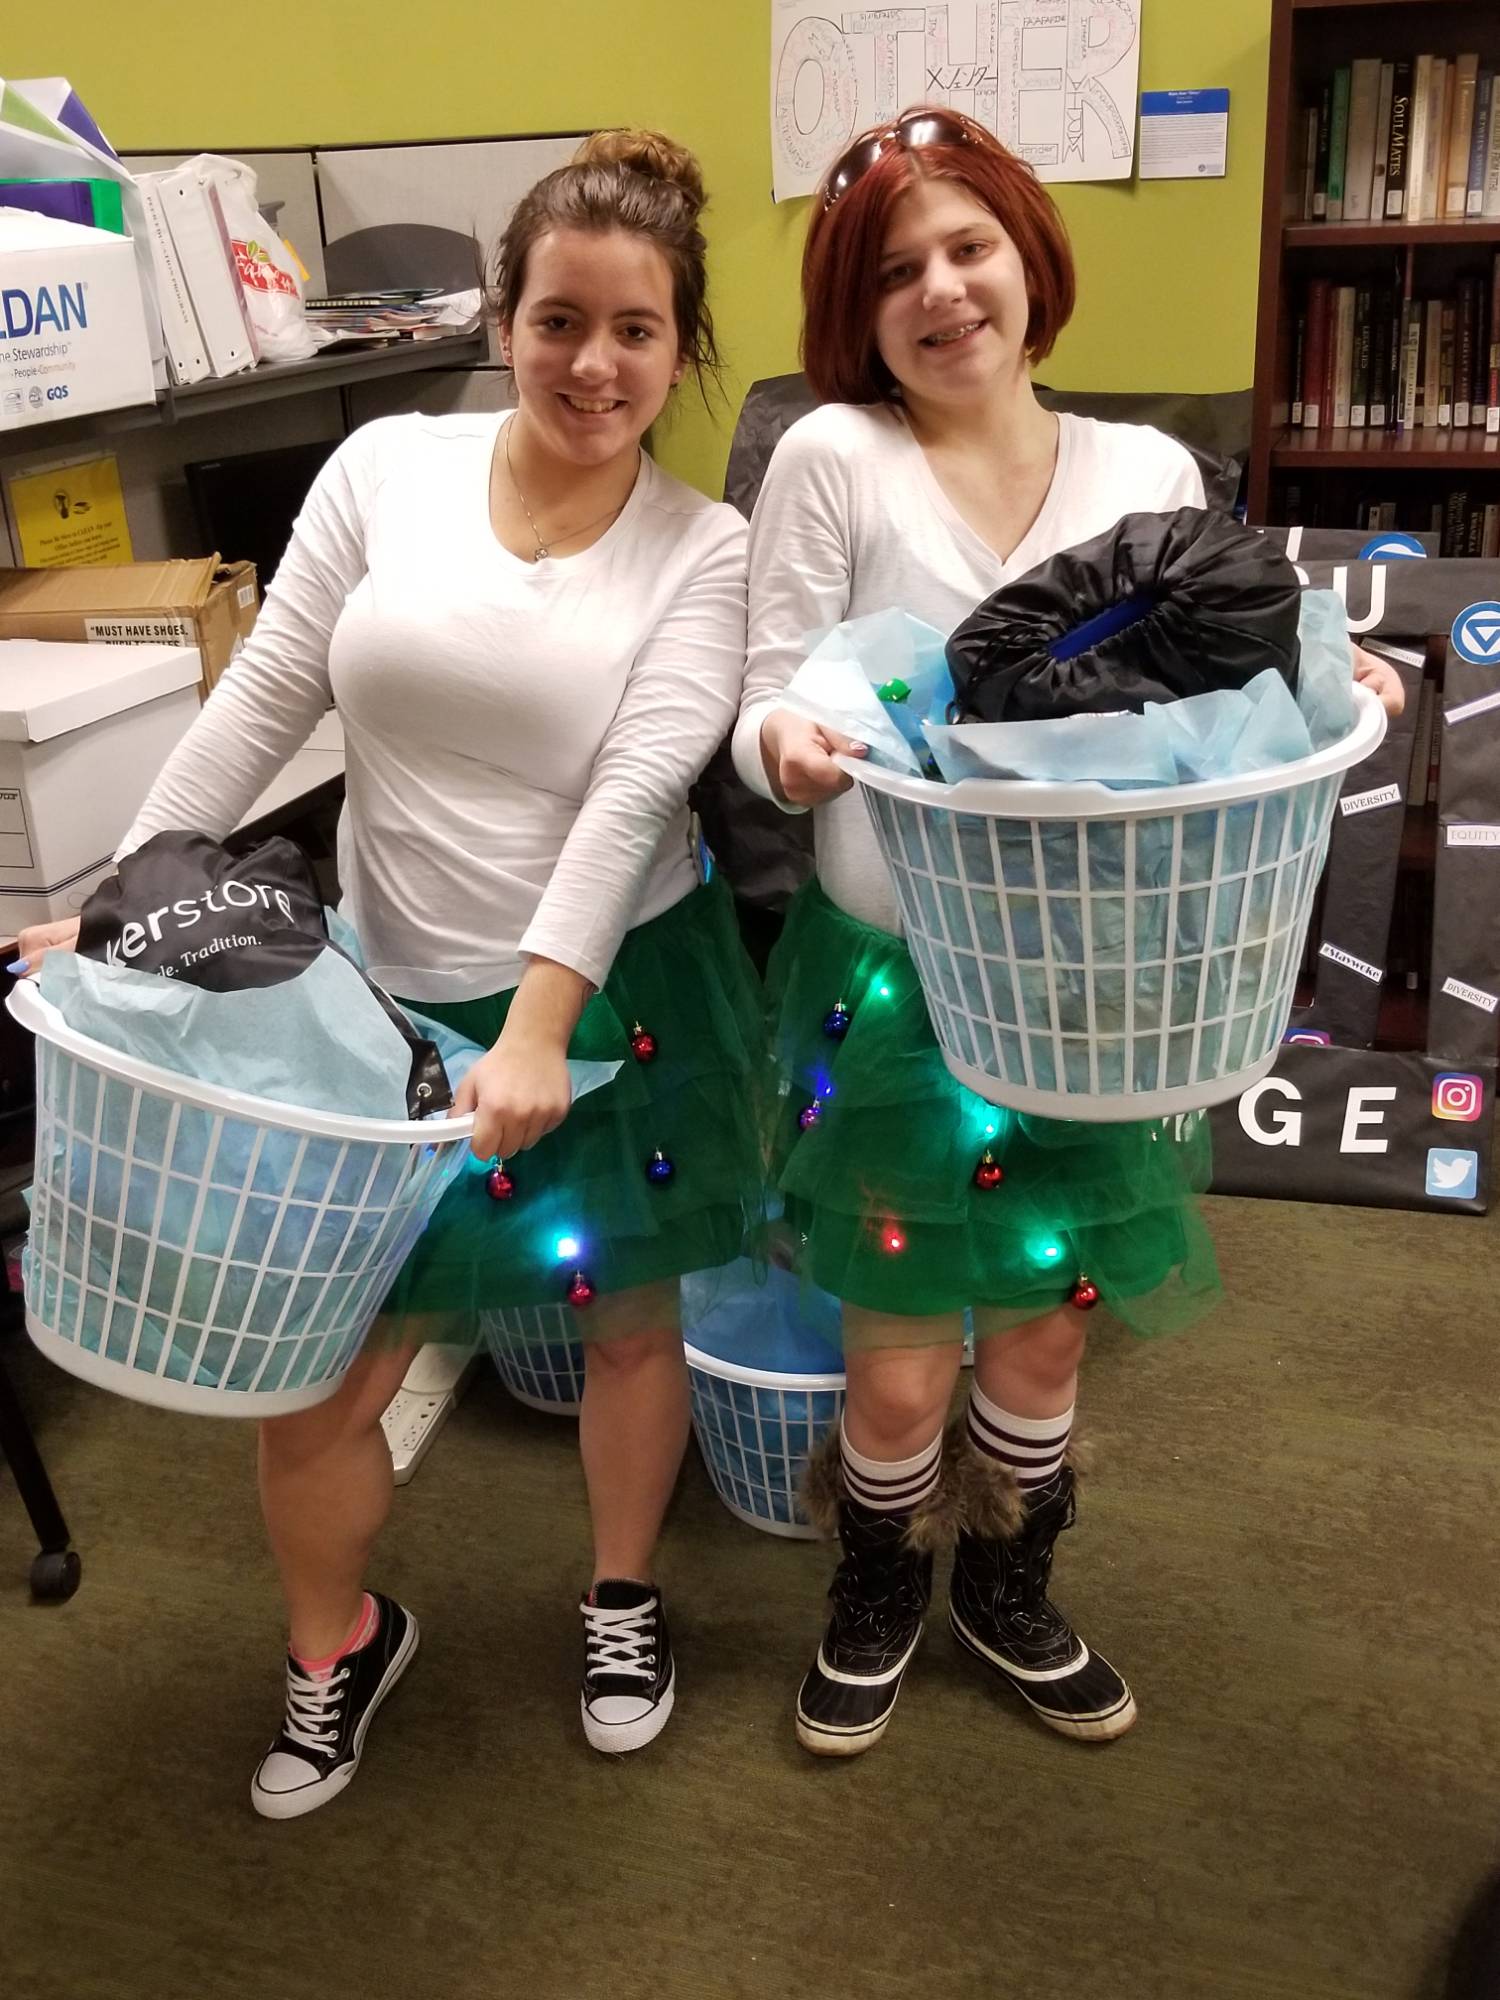 Two students smiling while holding laundry baskets